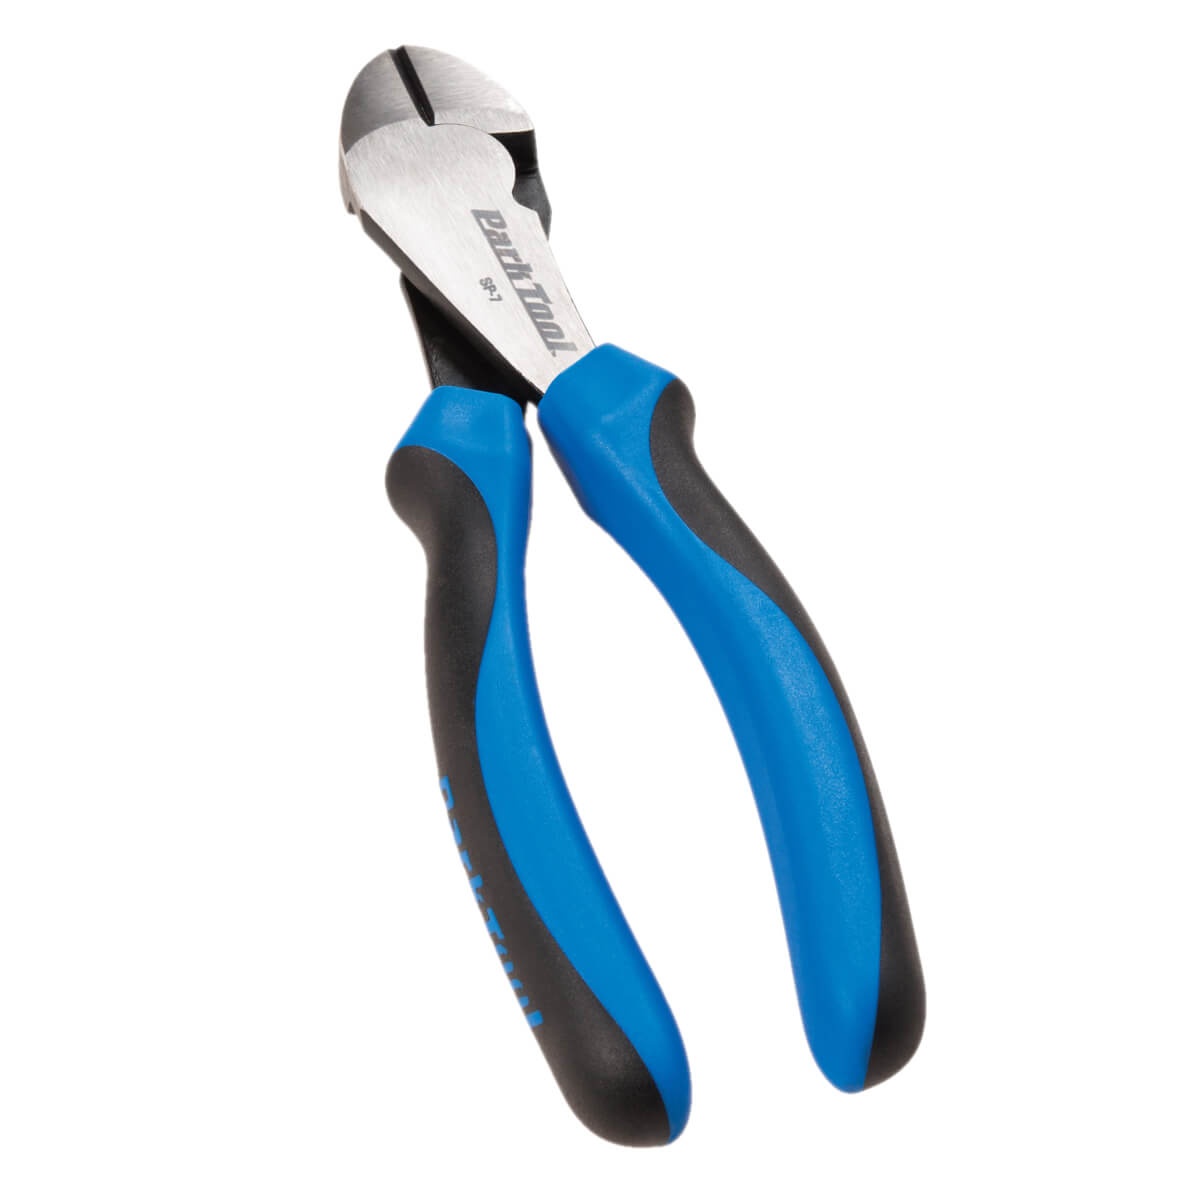 Park Tool SP-7 Side Cutter Pliers - The Bikesmiths